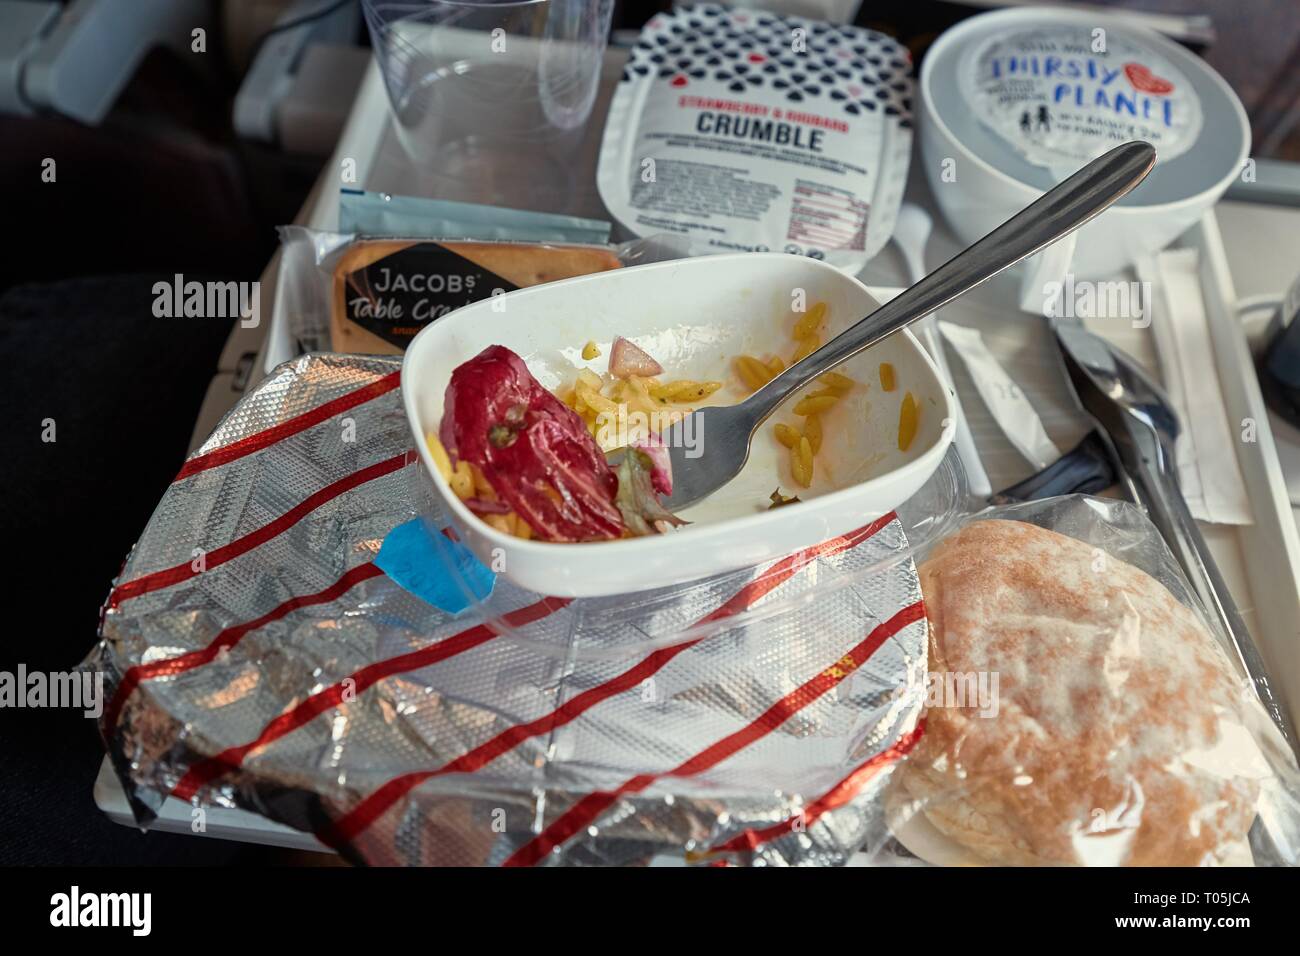 Airline food consumed Stock Photo